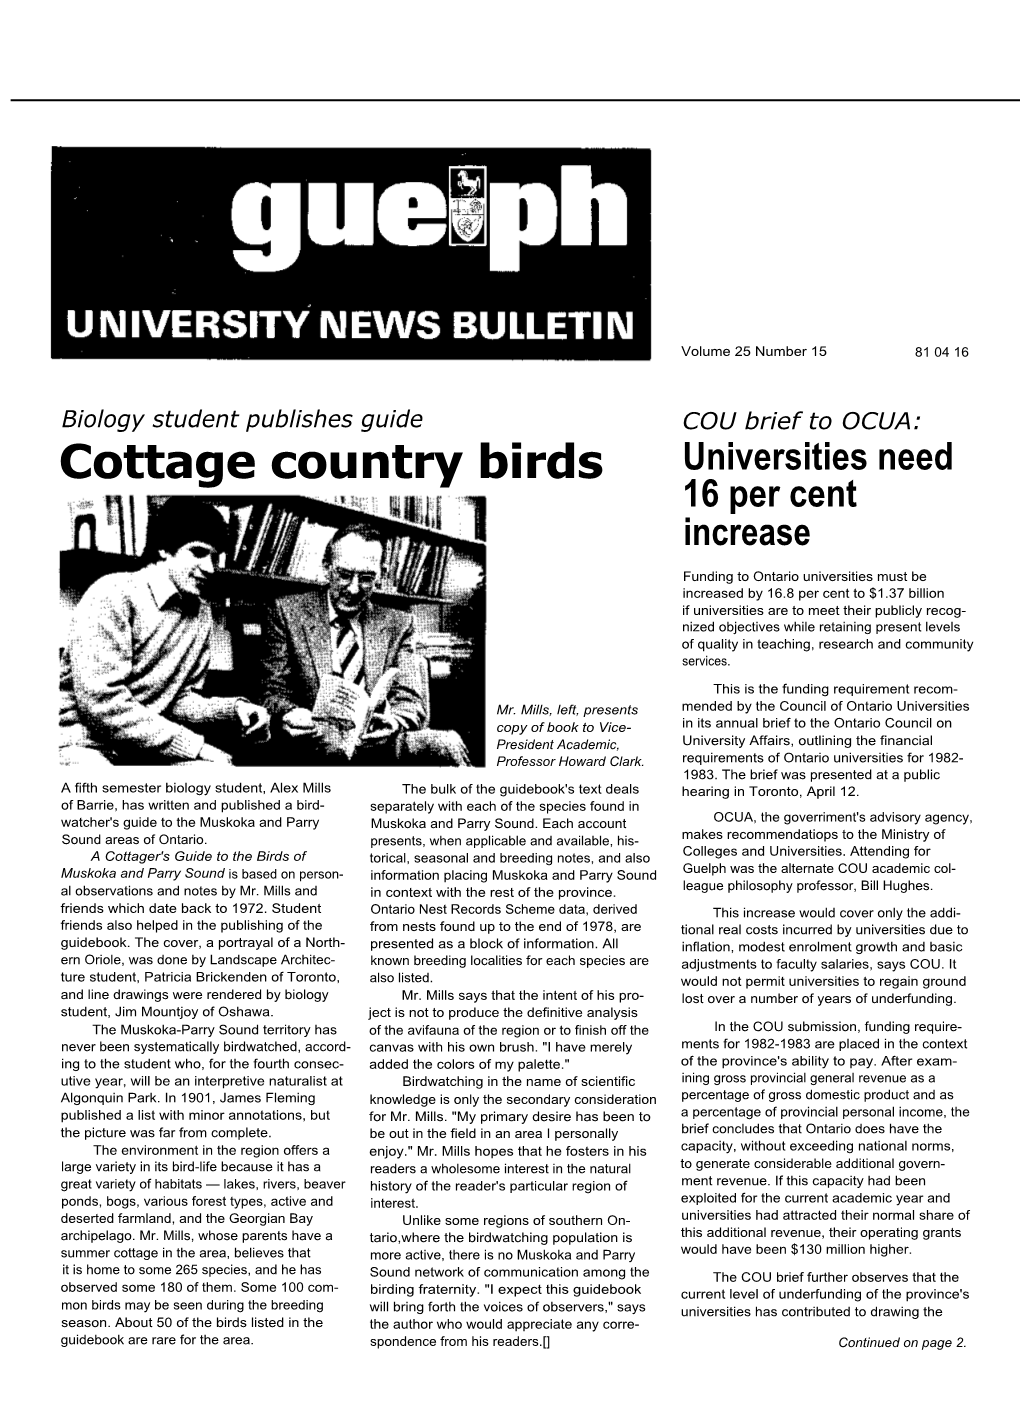 Cottage Country Birds Universities Need 16 Per Cent Increase